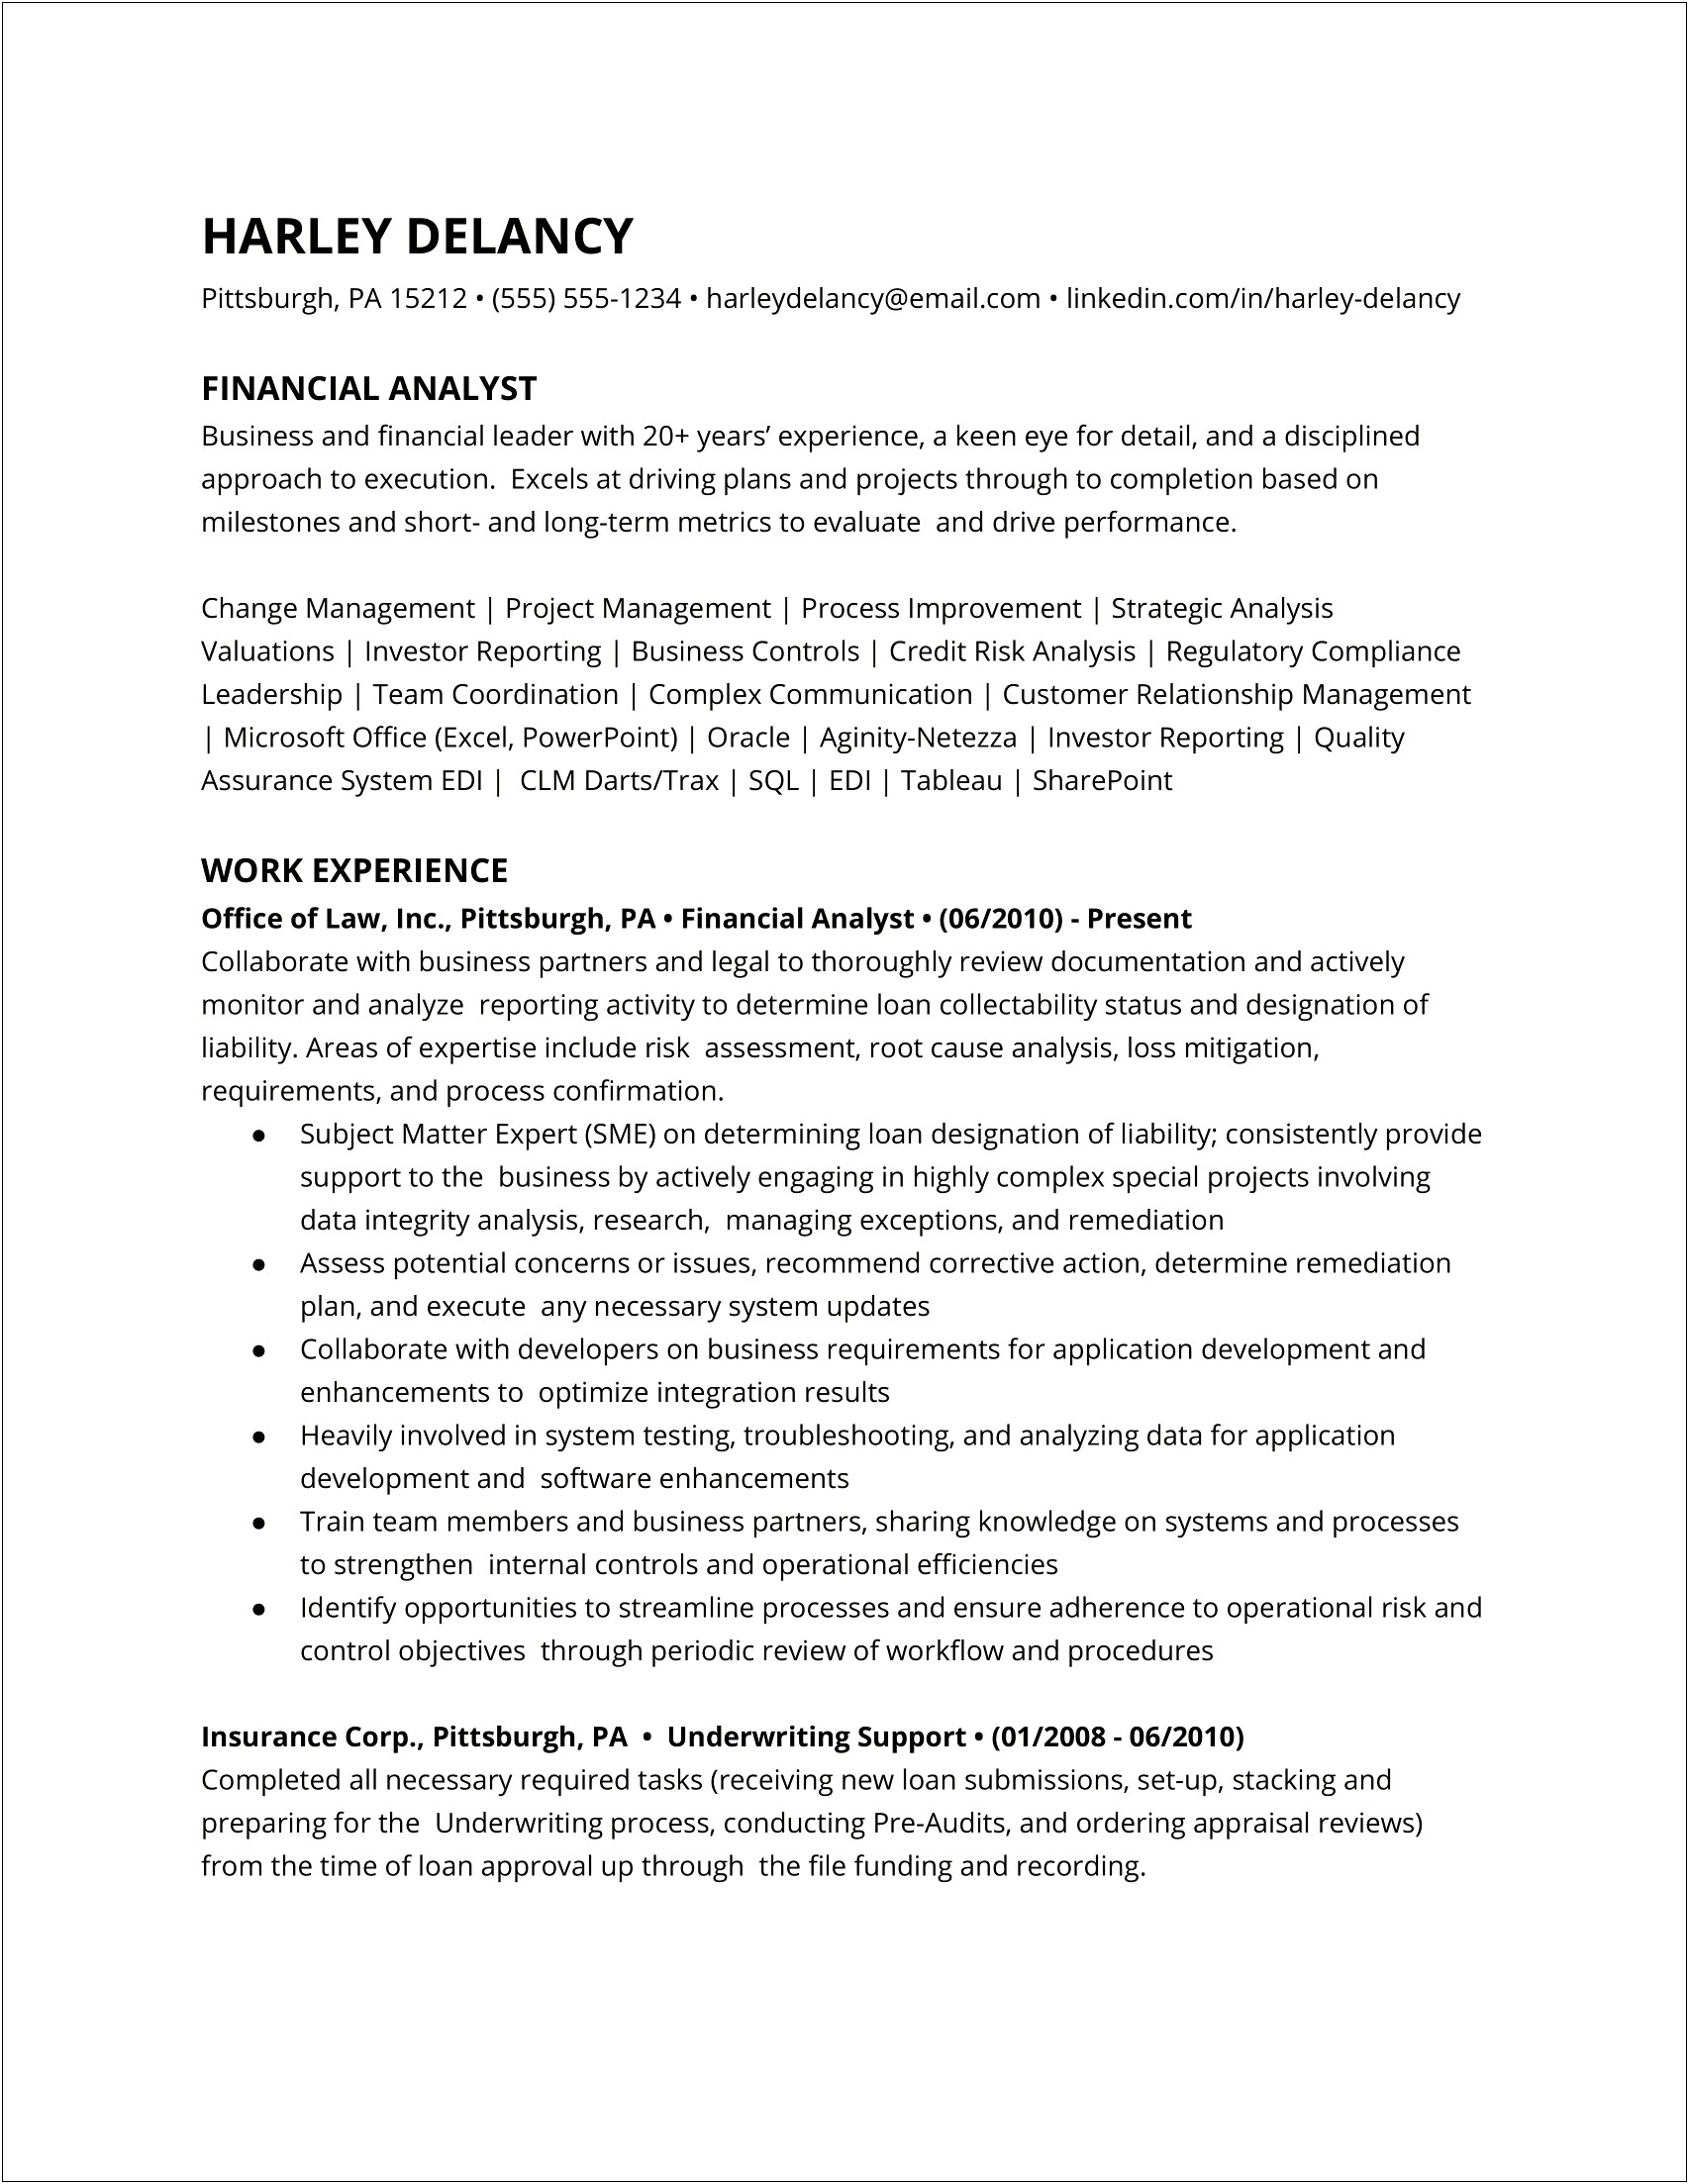 Sample Resume Financial Analyst Entry Level